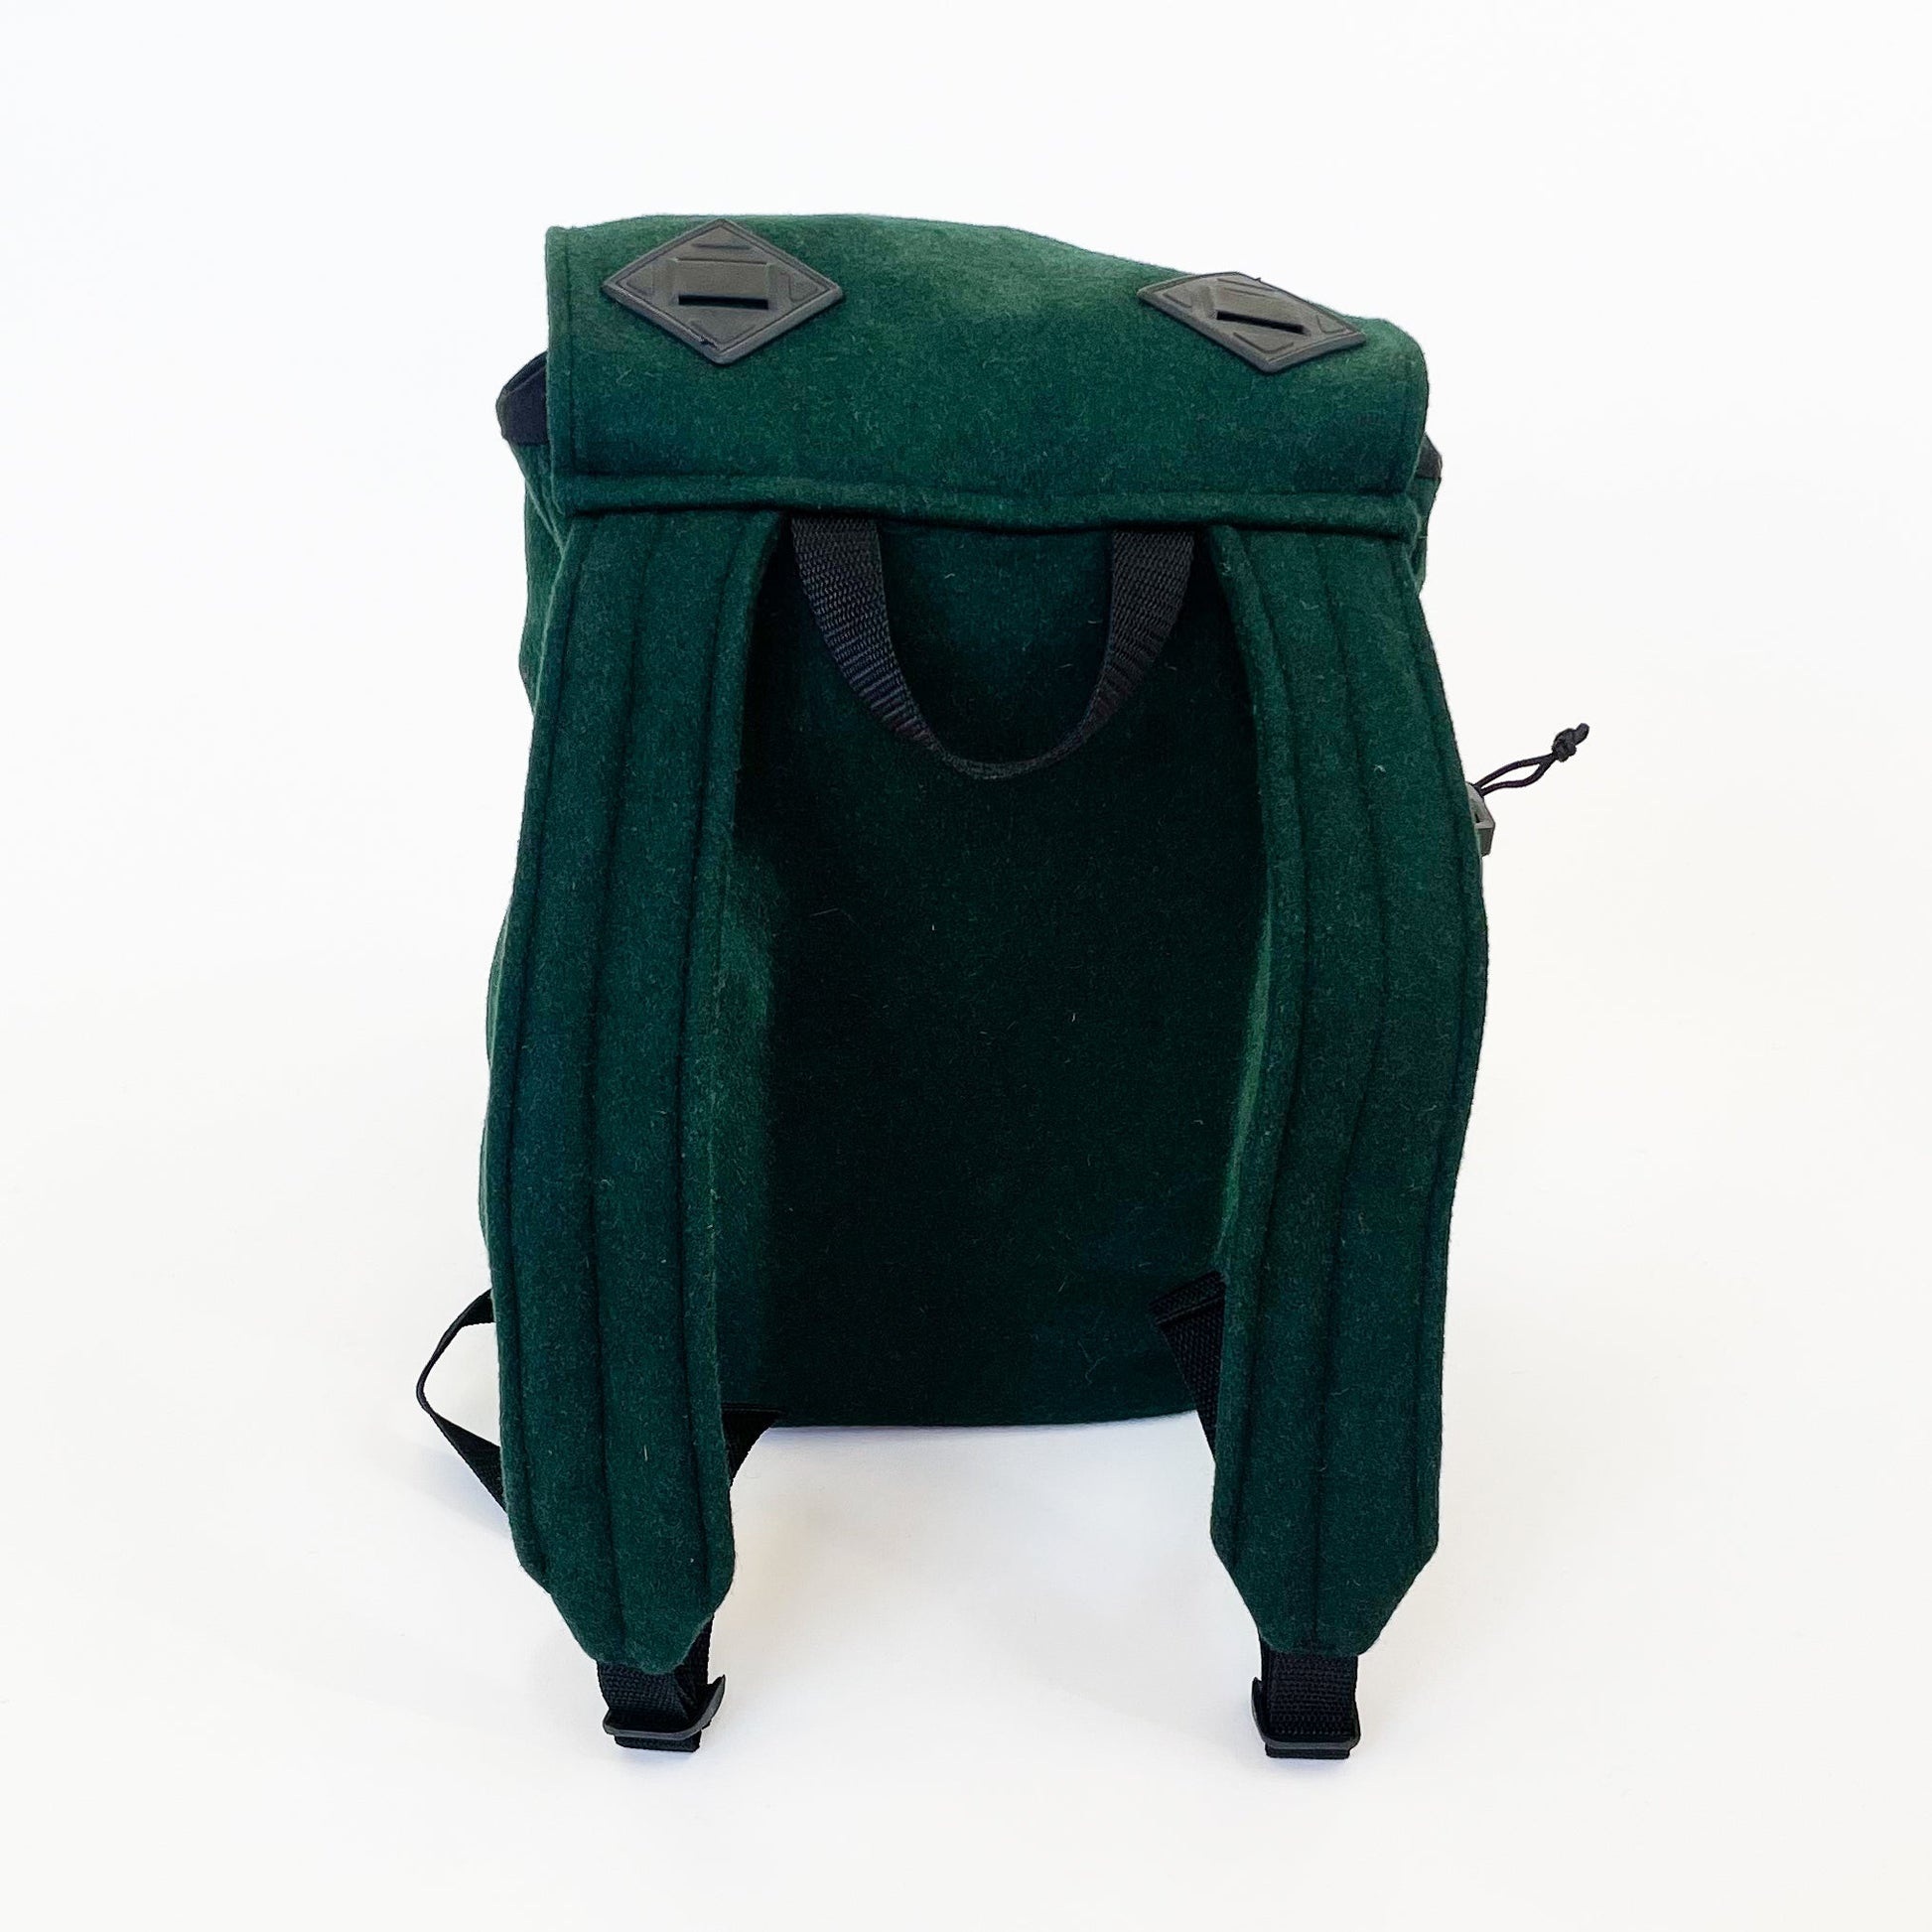 Wool back pack spruce green, back view